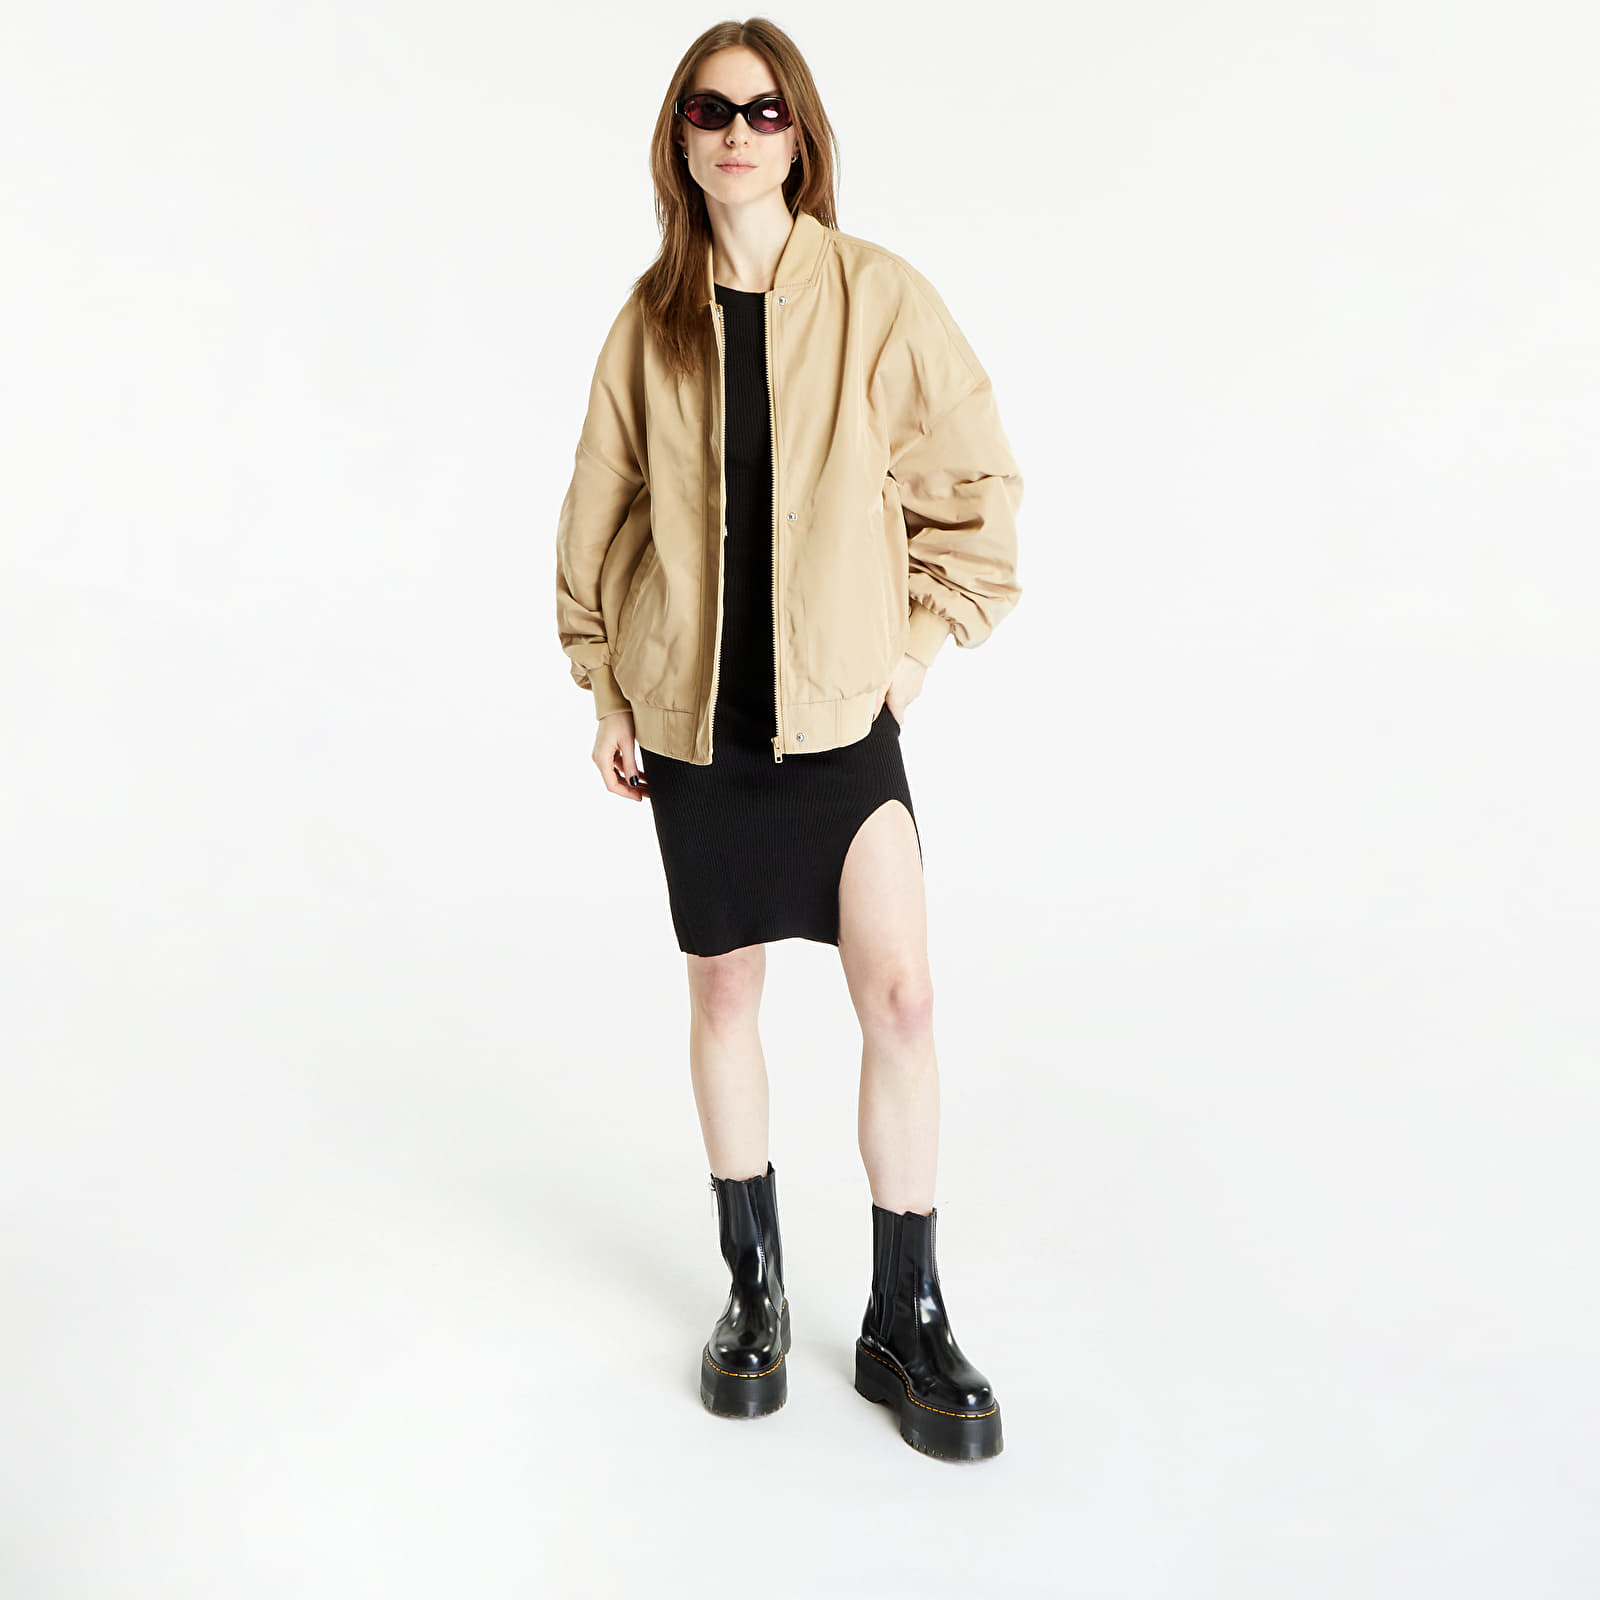 Jacket Oversized | Recycled Classics Union Light Ladies Beige Jackets Urban Bomber Queens